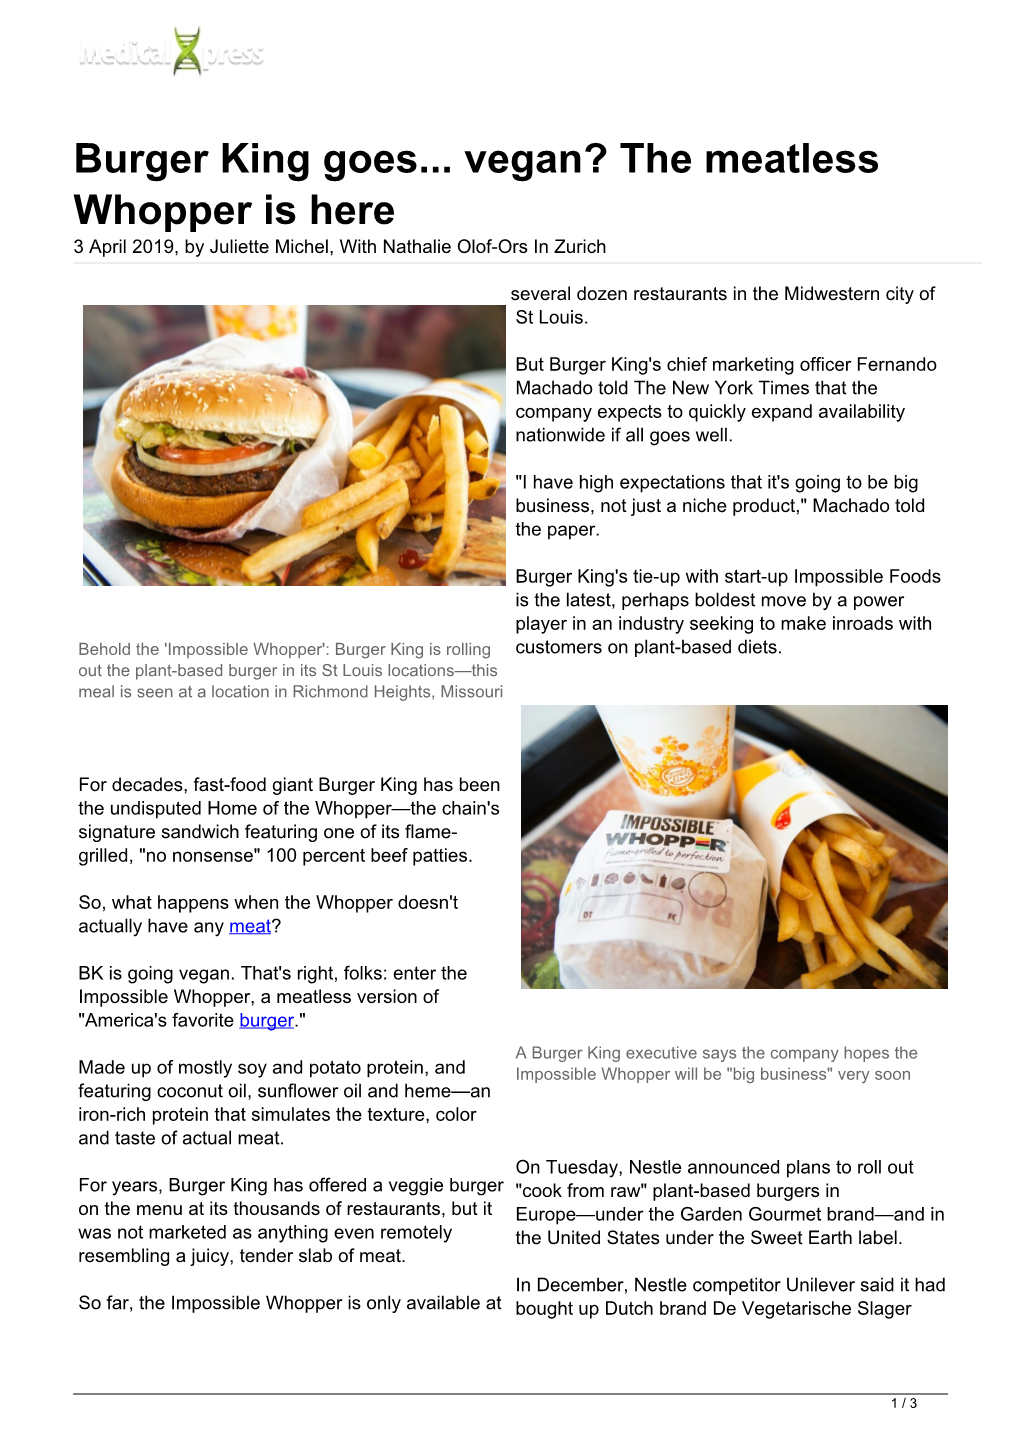 Burger King Goes... Vegan? the Meatless Whopper Is Here 3 April 2019, by Juliette Michel, with Nathalie Olof-Ors in Zurich